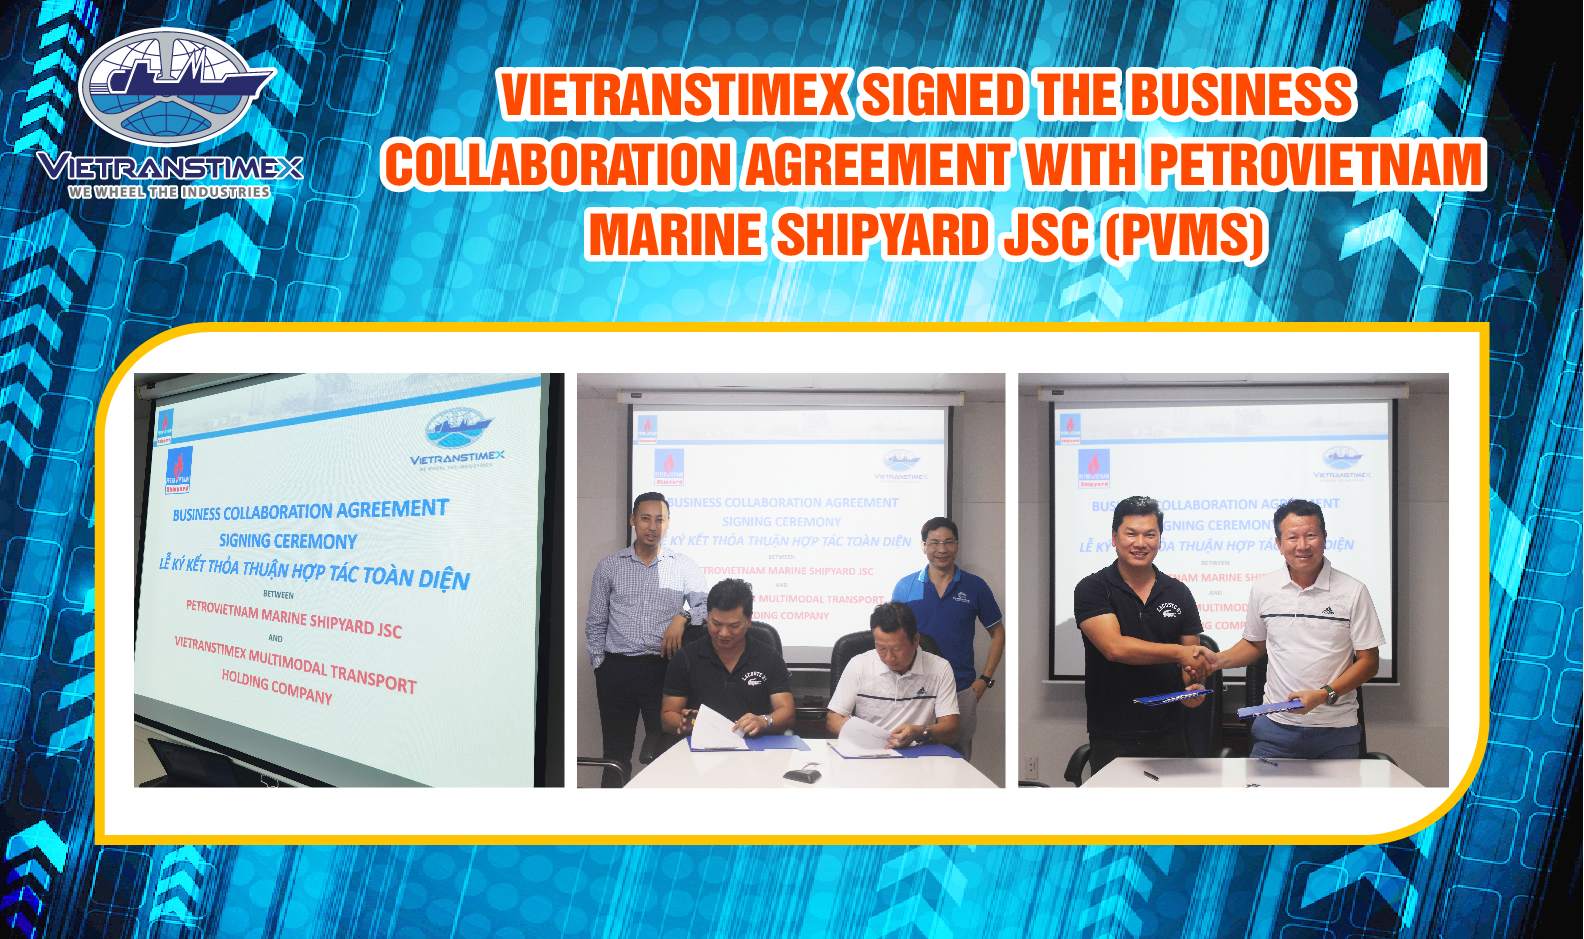 Vietranstimex Signed The Business Collaboration Agreement With Petrovietnam Marine Shipyard Jsc (PVMS)